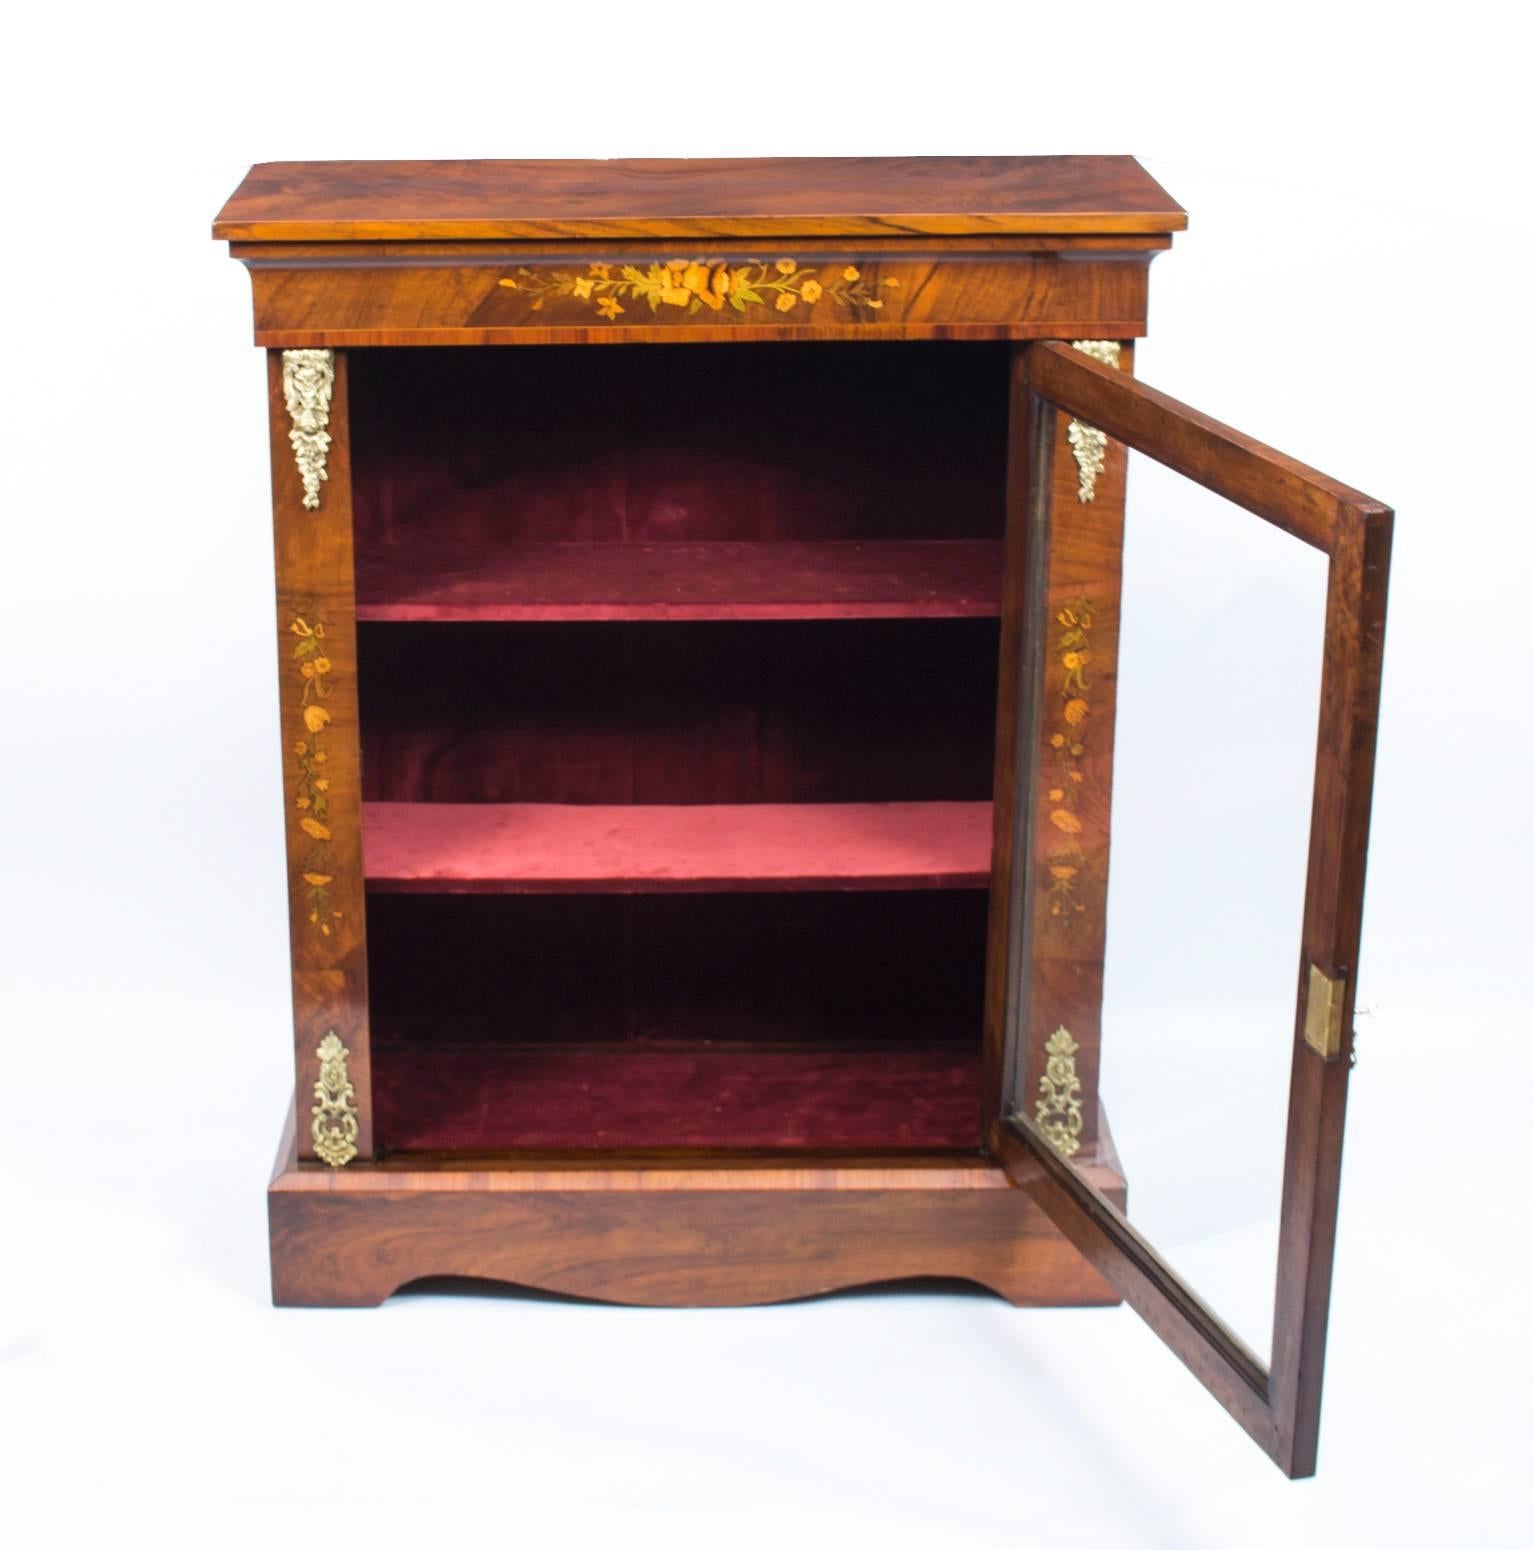 This is a beautiful antique Victorian pier cabinet, circa 1870 in date.

It has been accomplished in burr walnut with fabulous floral marquetry decoration.

Adding to its truly unique character it is decorated with exquisite gilded ormolu mounts